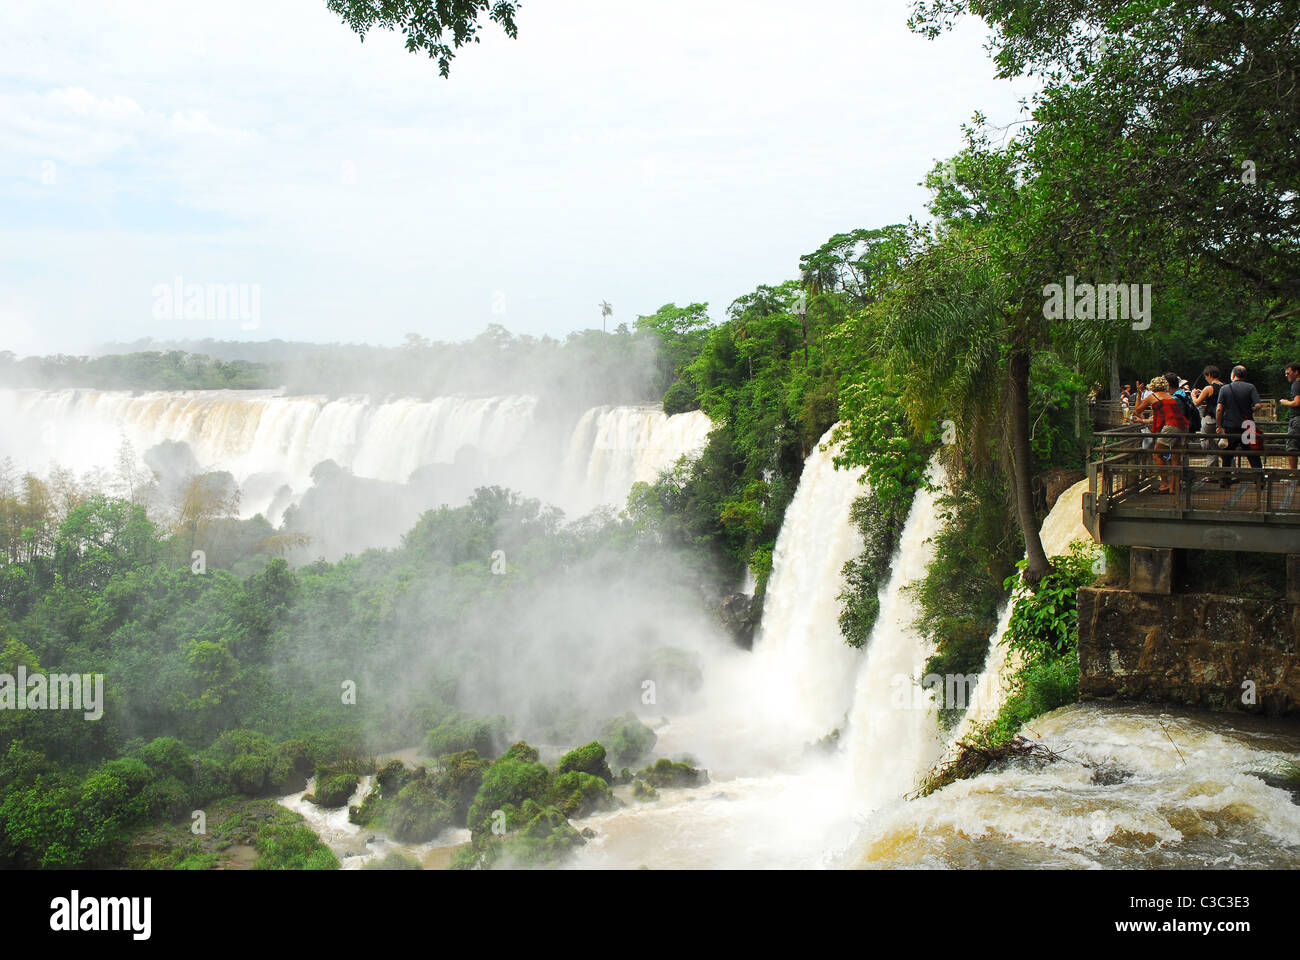 Iguacu falls on the border between Brazil and Argentina Stock Photo